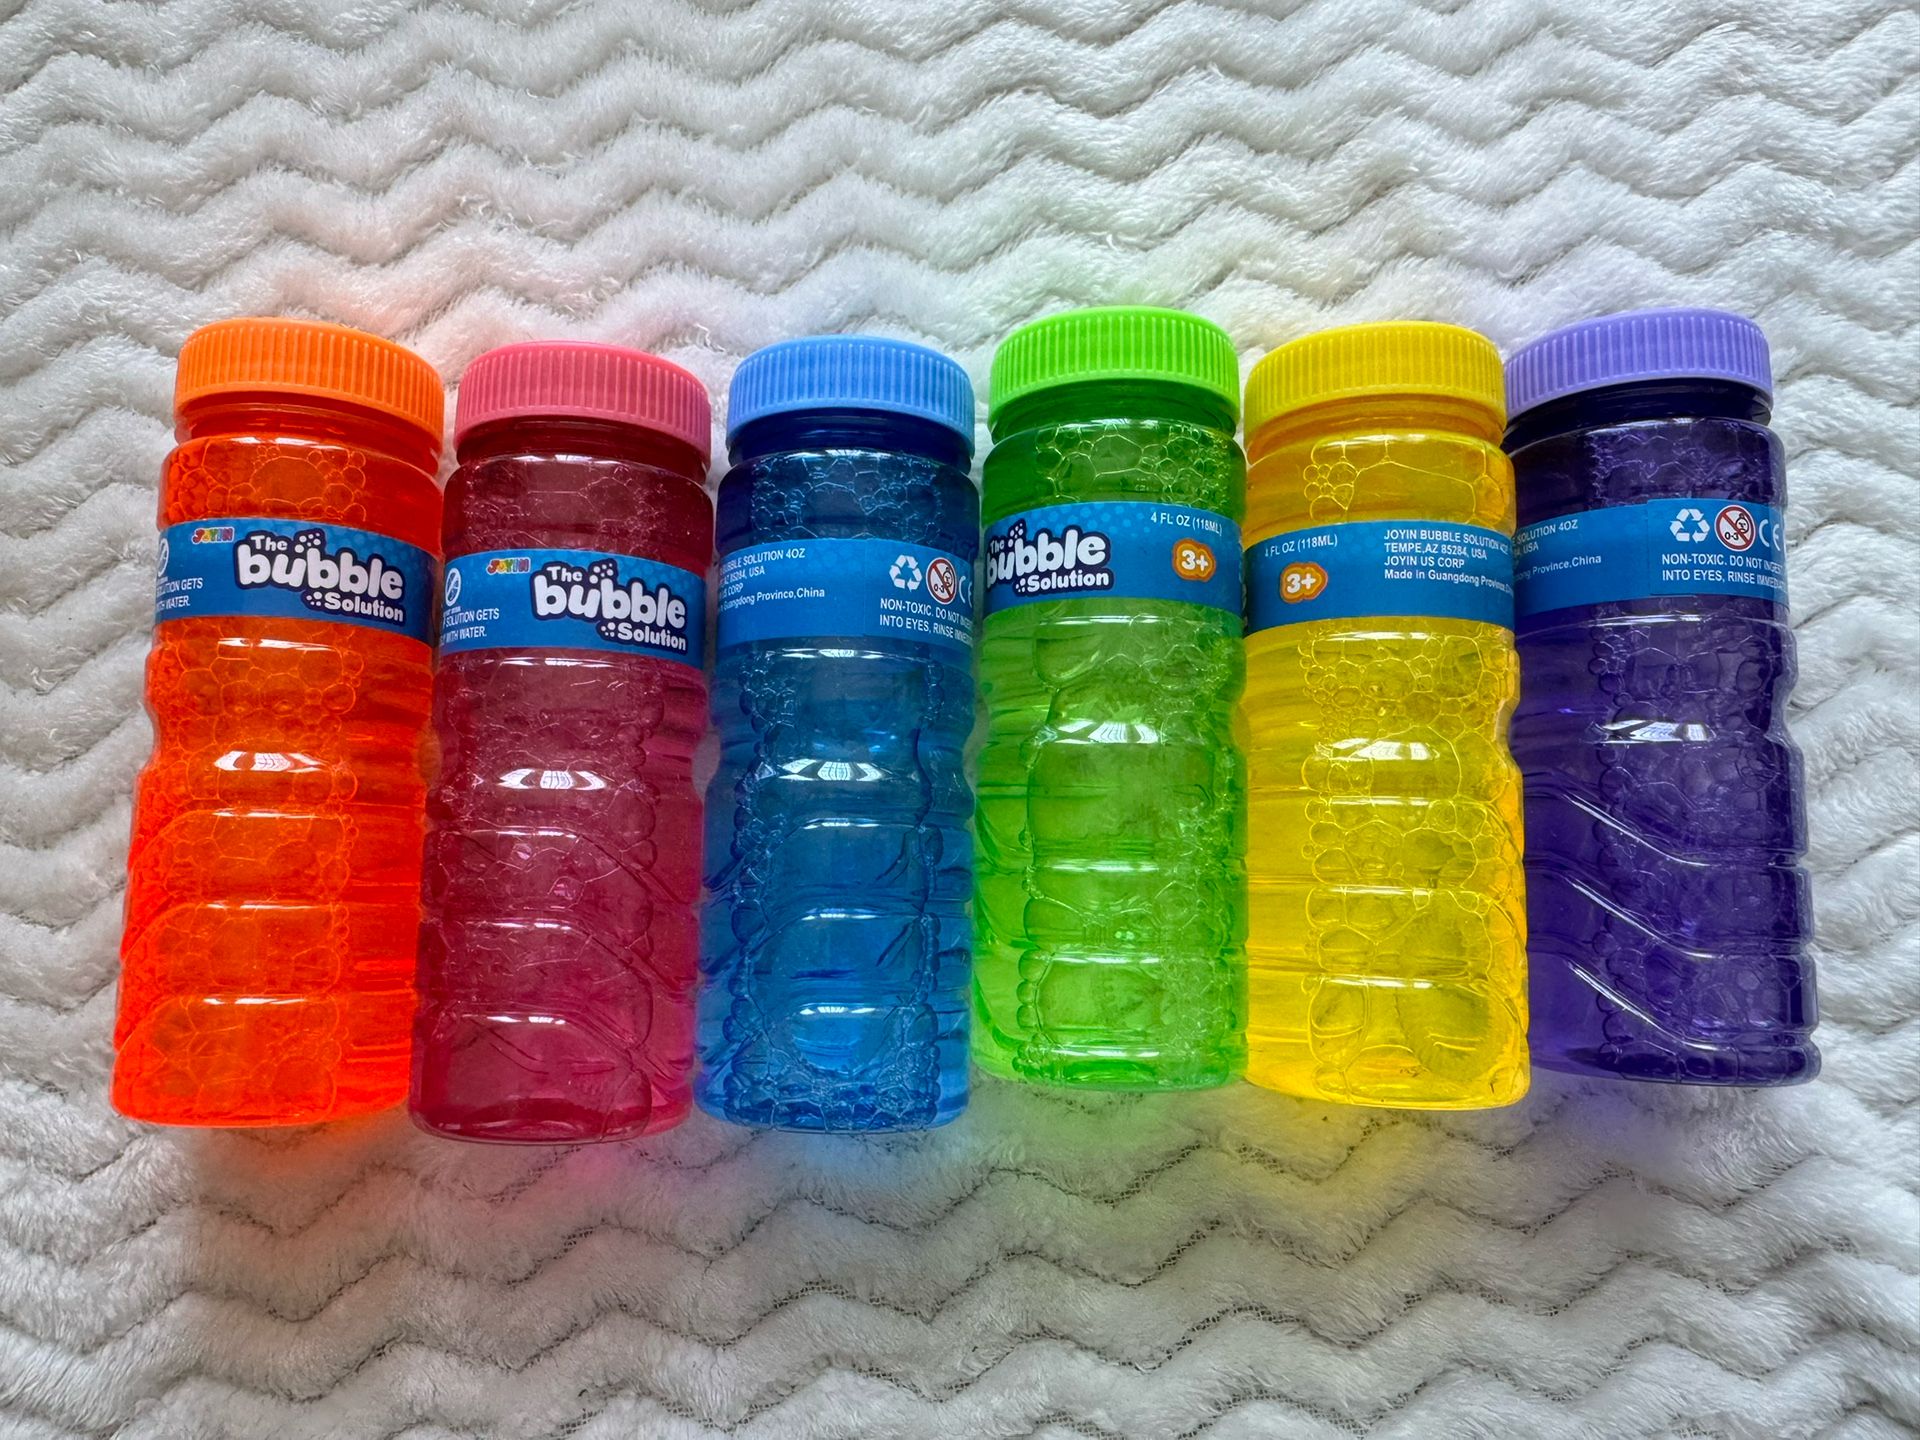 Box of 32 bubbles in various colored bottles